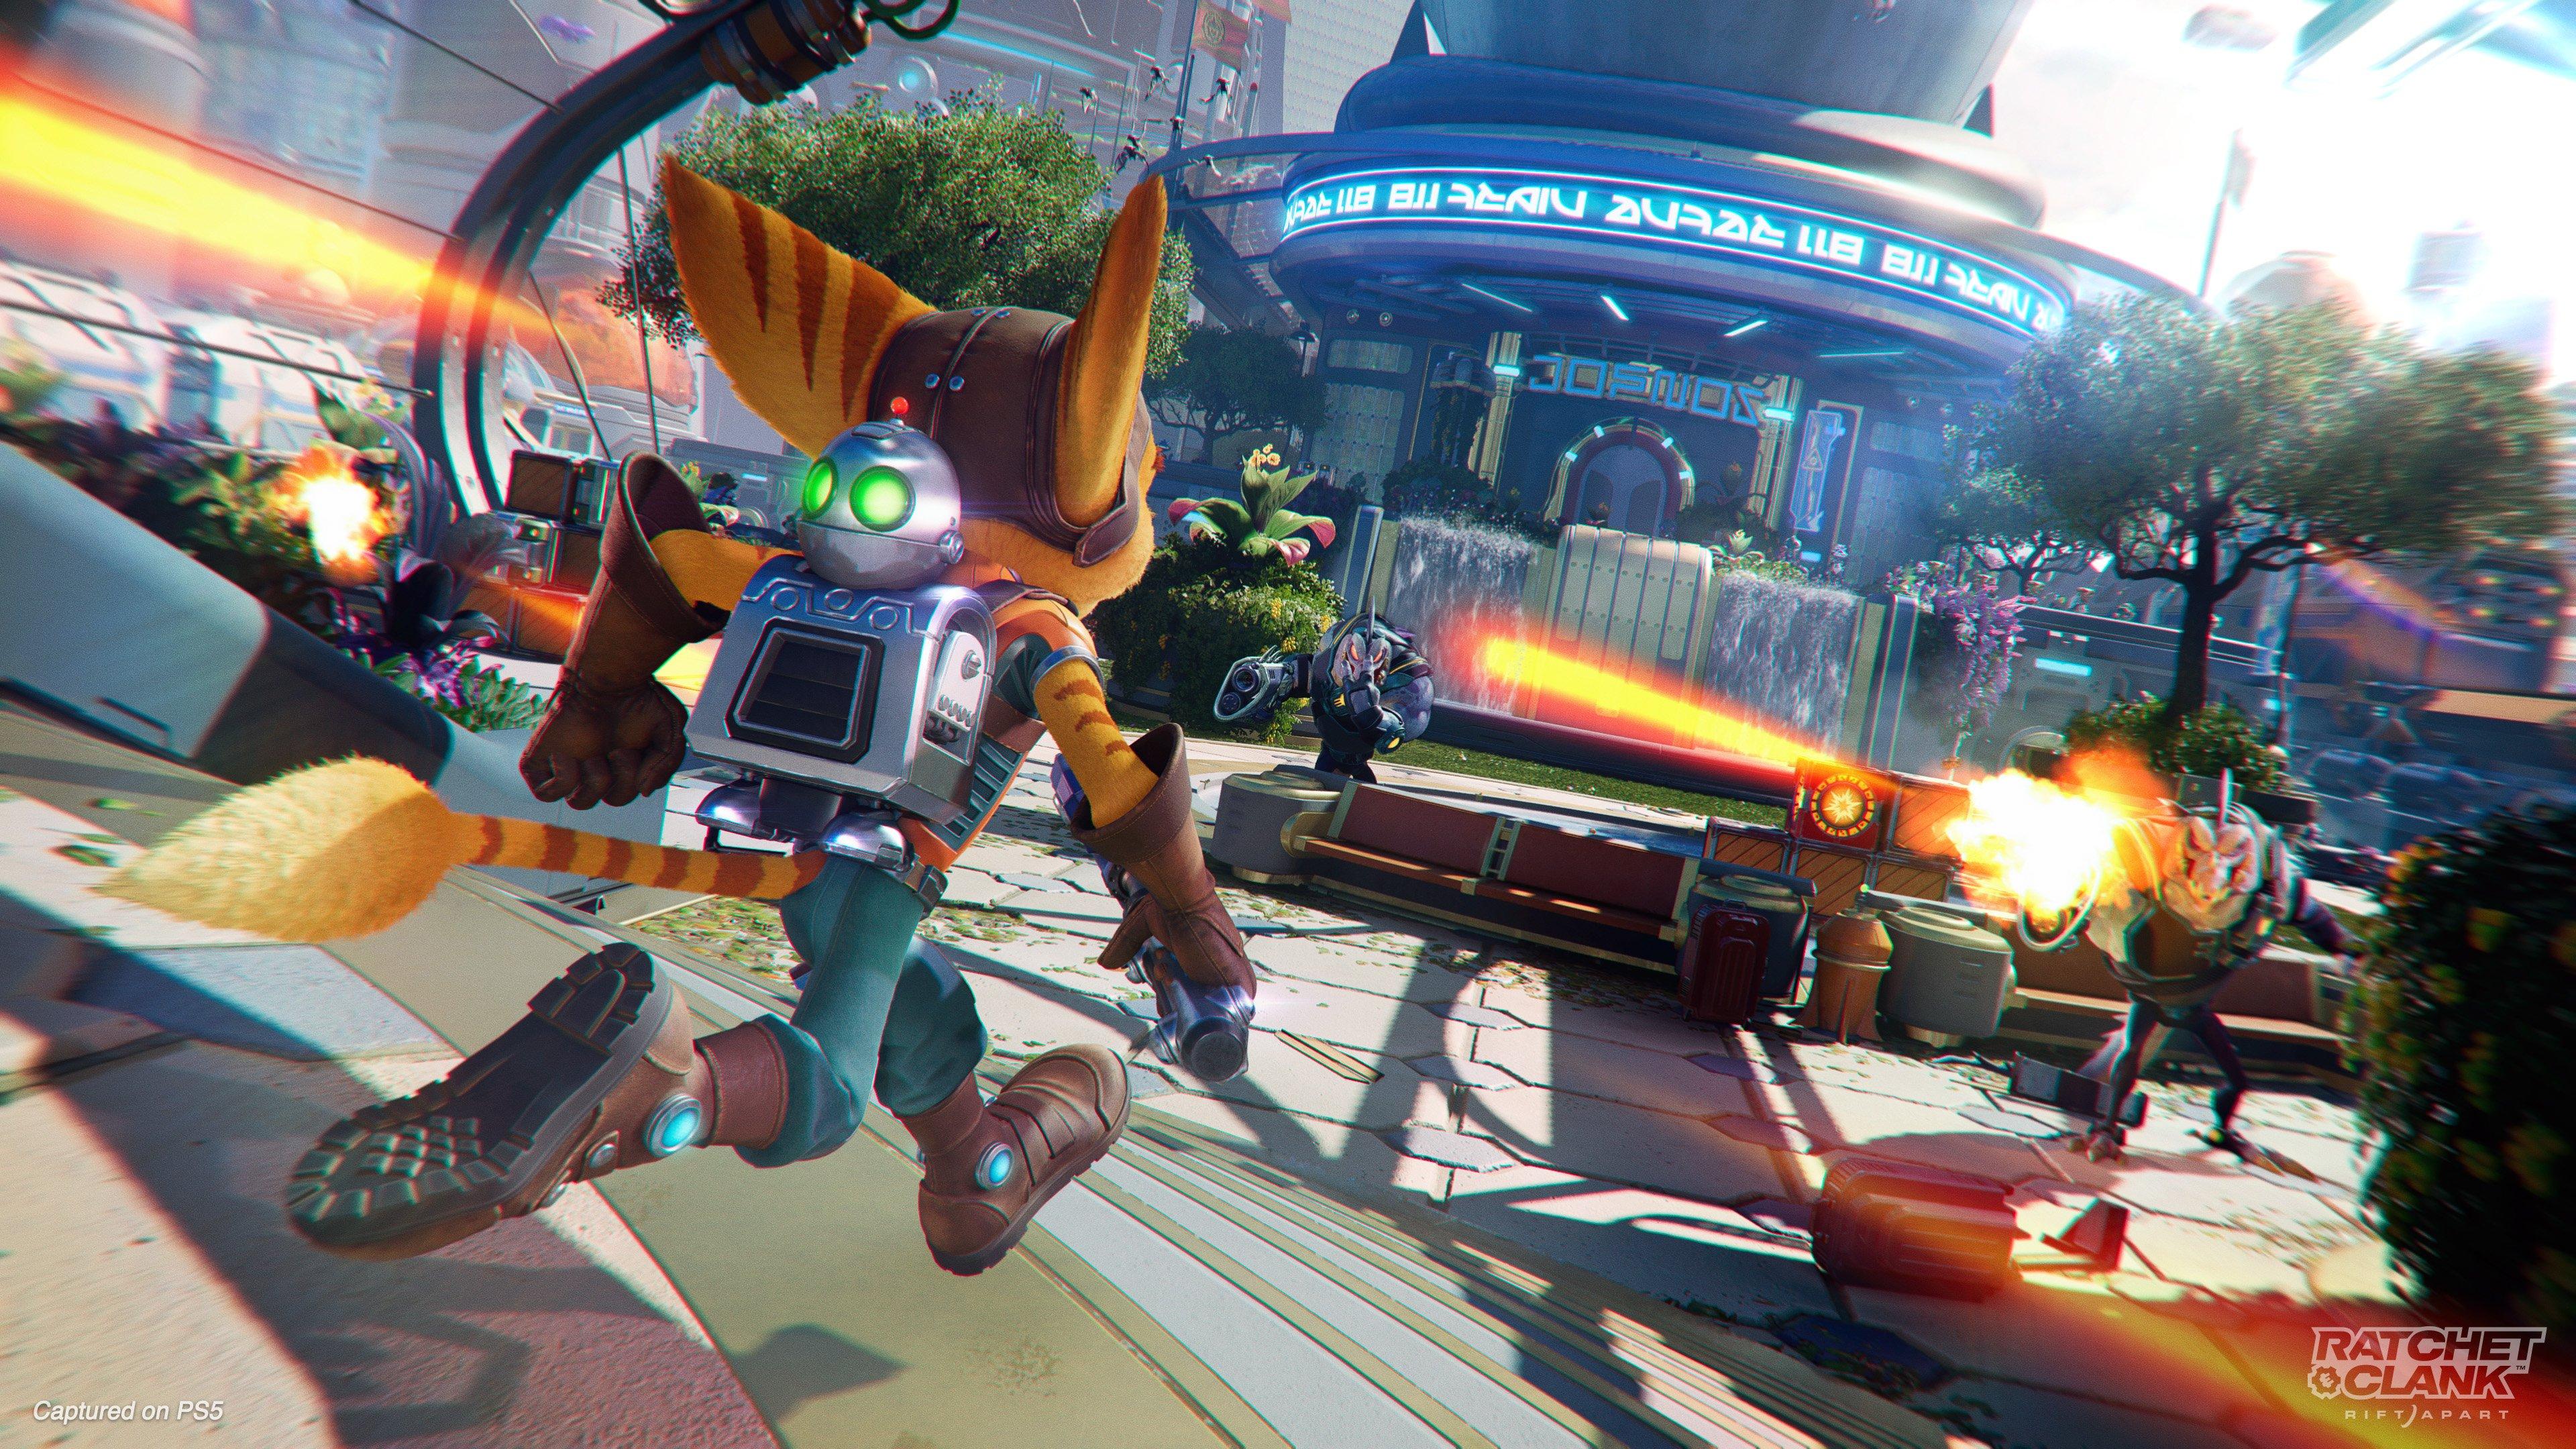 Ratchet and Clank: Rift Apart Launch Edition for PS5, PlayStation 5